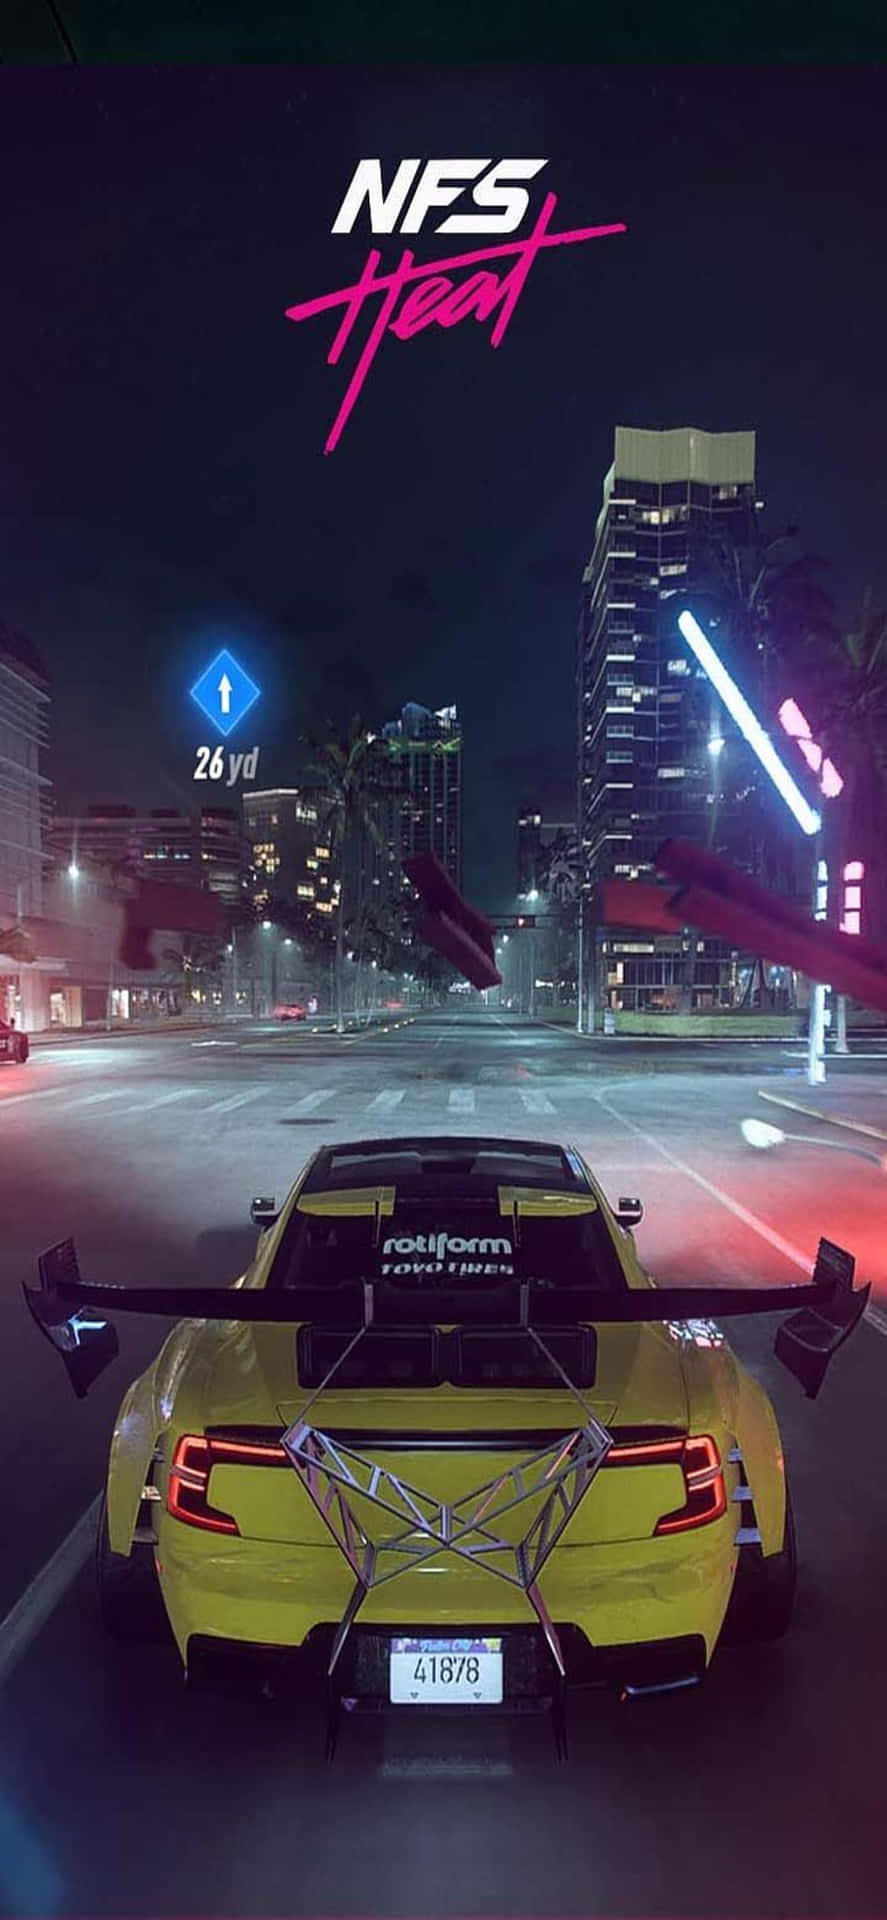 "Enjoy an exhilarating ride with Need for Speed Heat on your Iphone Xs"